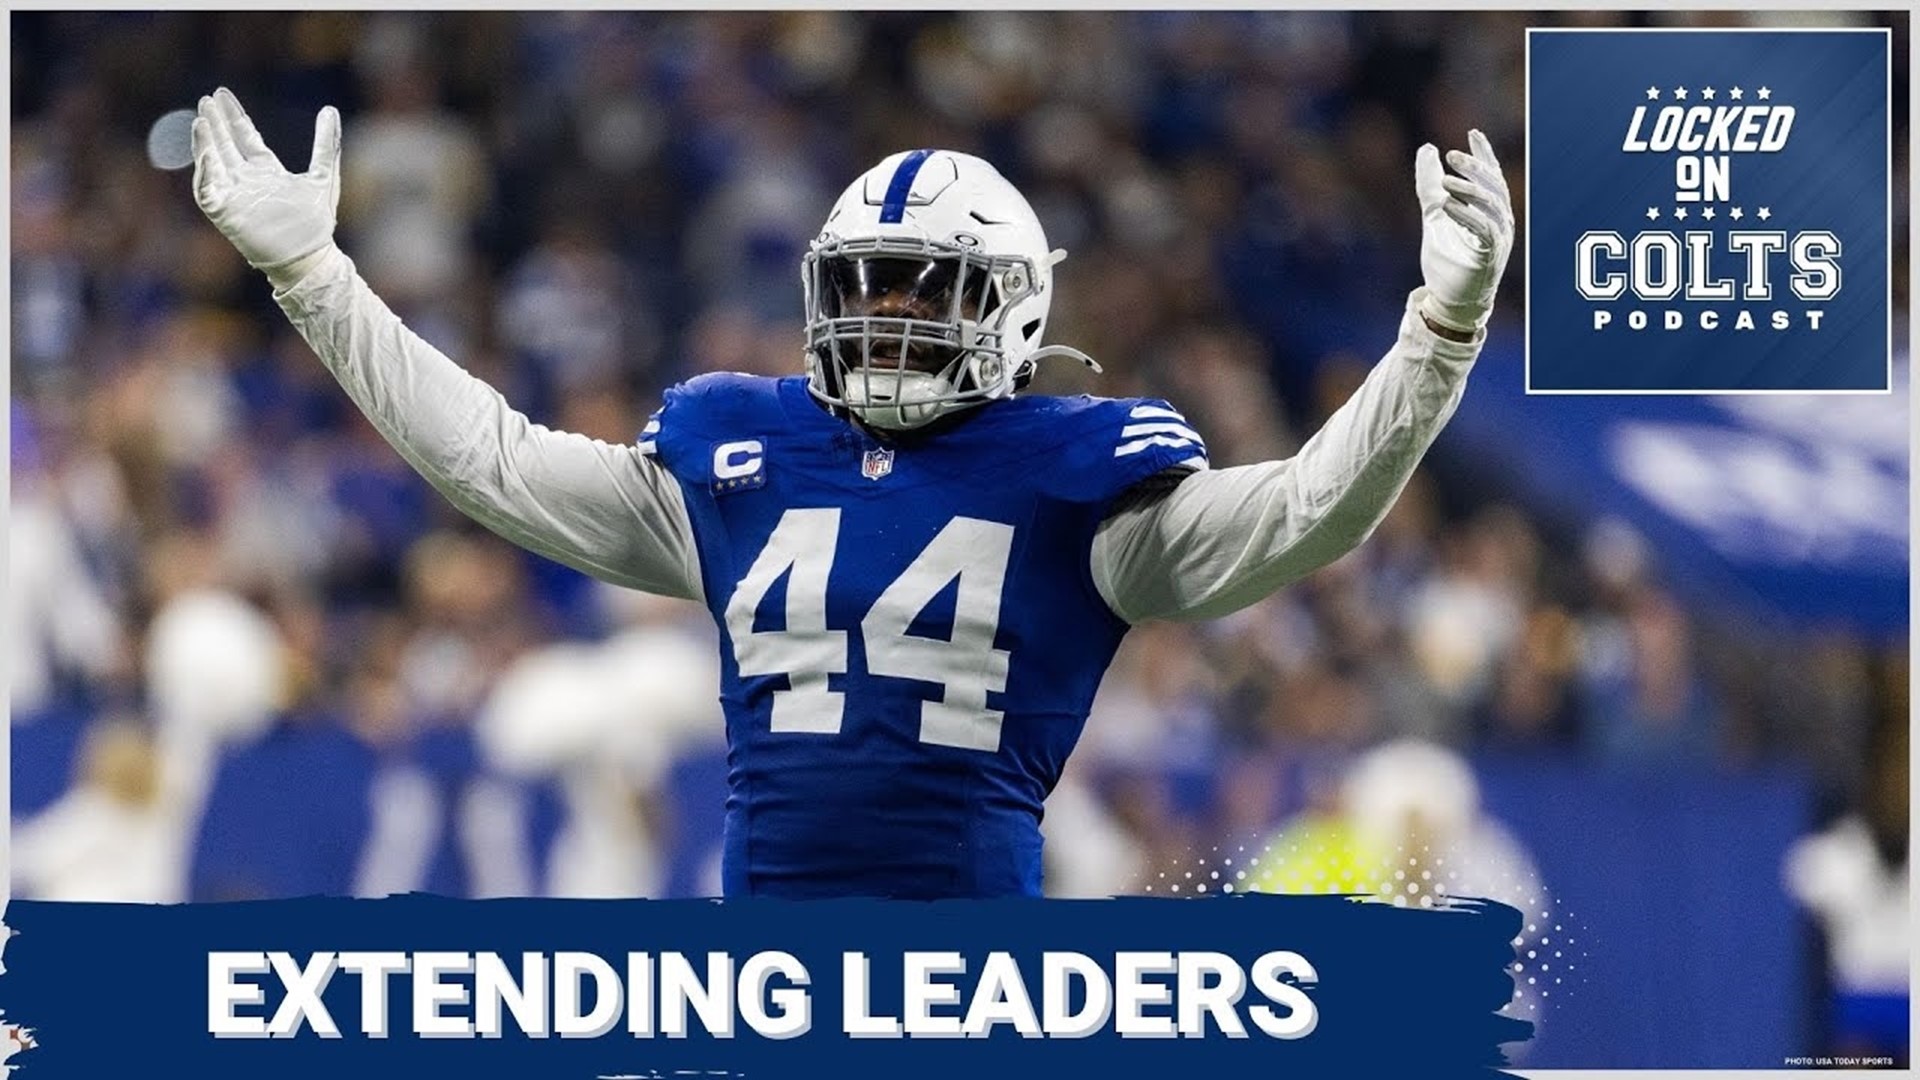 The Indianapolis Colts were fairly active on day one of free agency, re-signing Michael Pittman Jr., Tyquan Lewis, and Grover Stewart while extending Zaire Franklin.